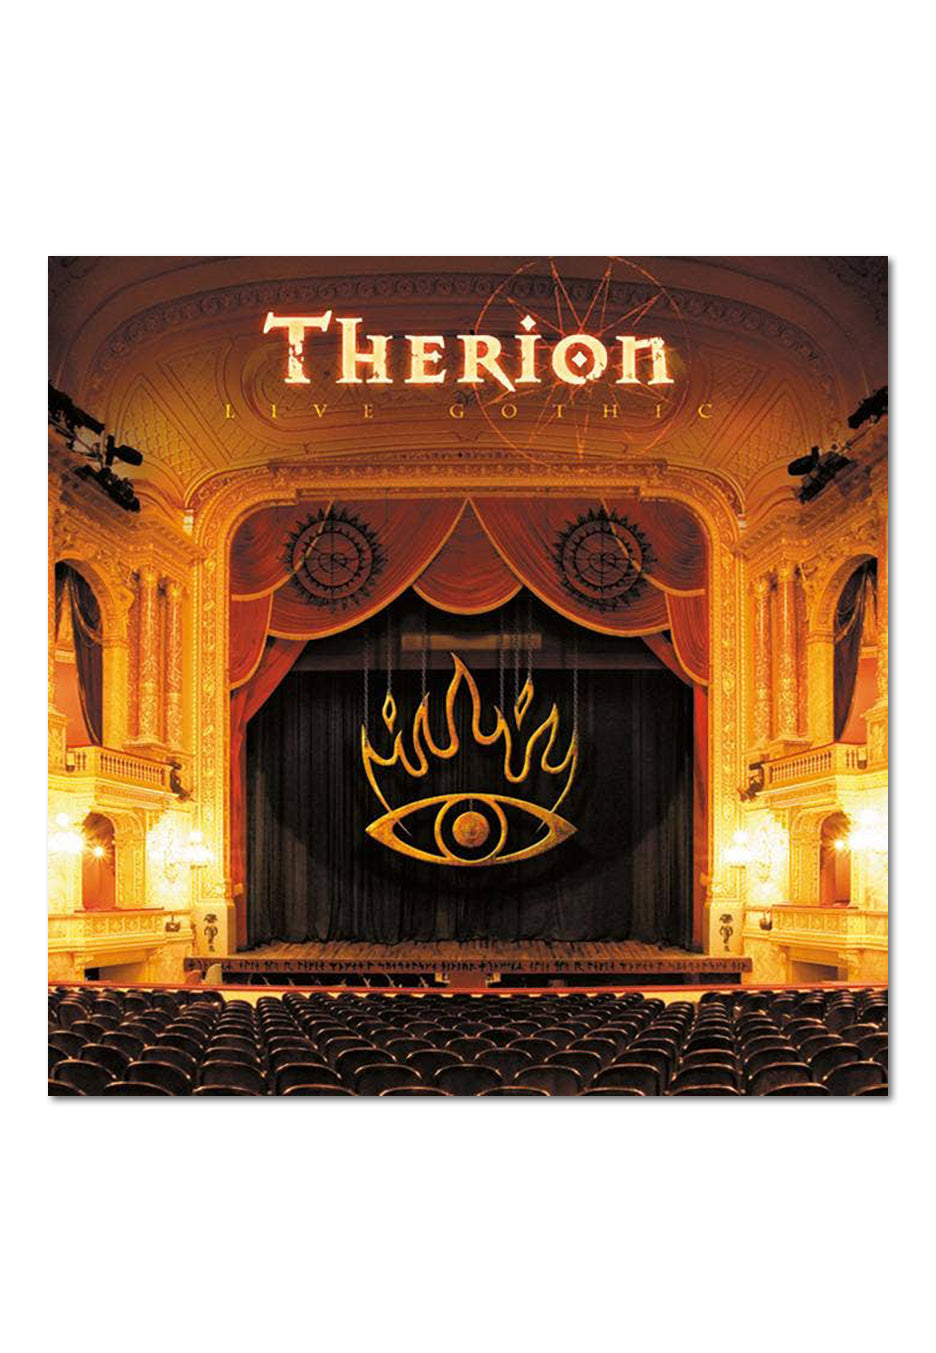 Therion - Live Gothic - 2 CD + DVD